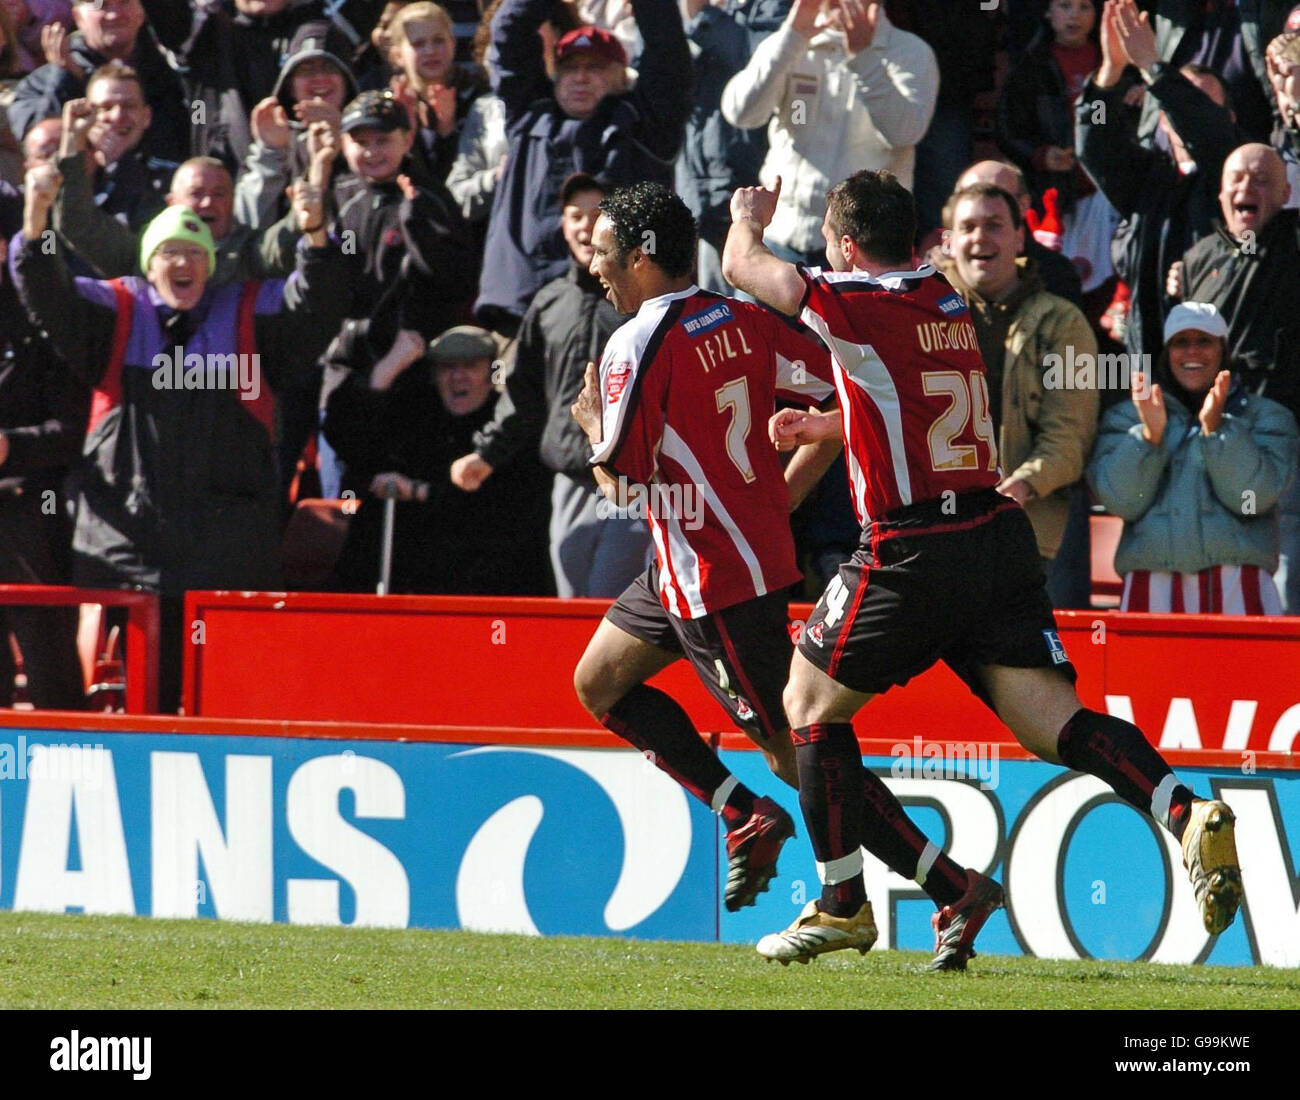 Sheffield United's Paul Ifill (L) celebrates his goal in front of the home fans with David Unsworth during the Coca-Cola Championship match against Hull at Bramall Lane, Sheffield, Saturday April 8, 2006. Stock Photo